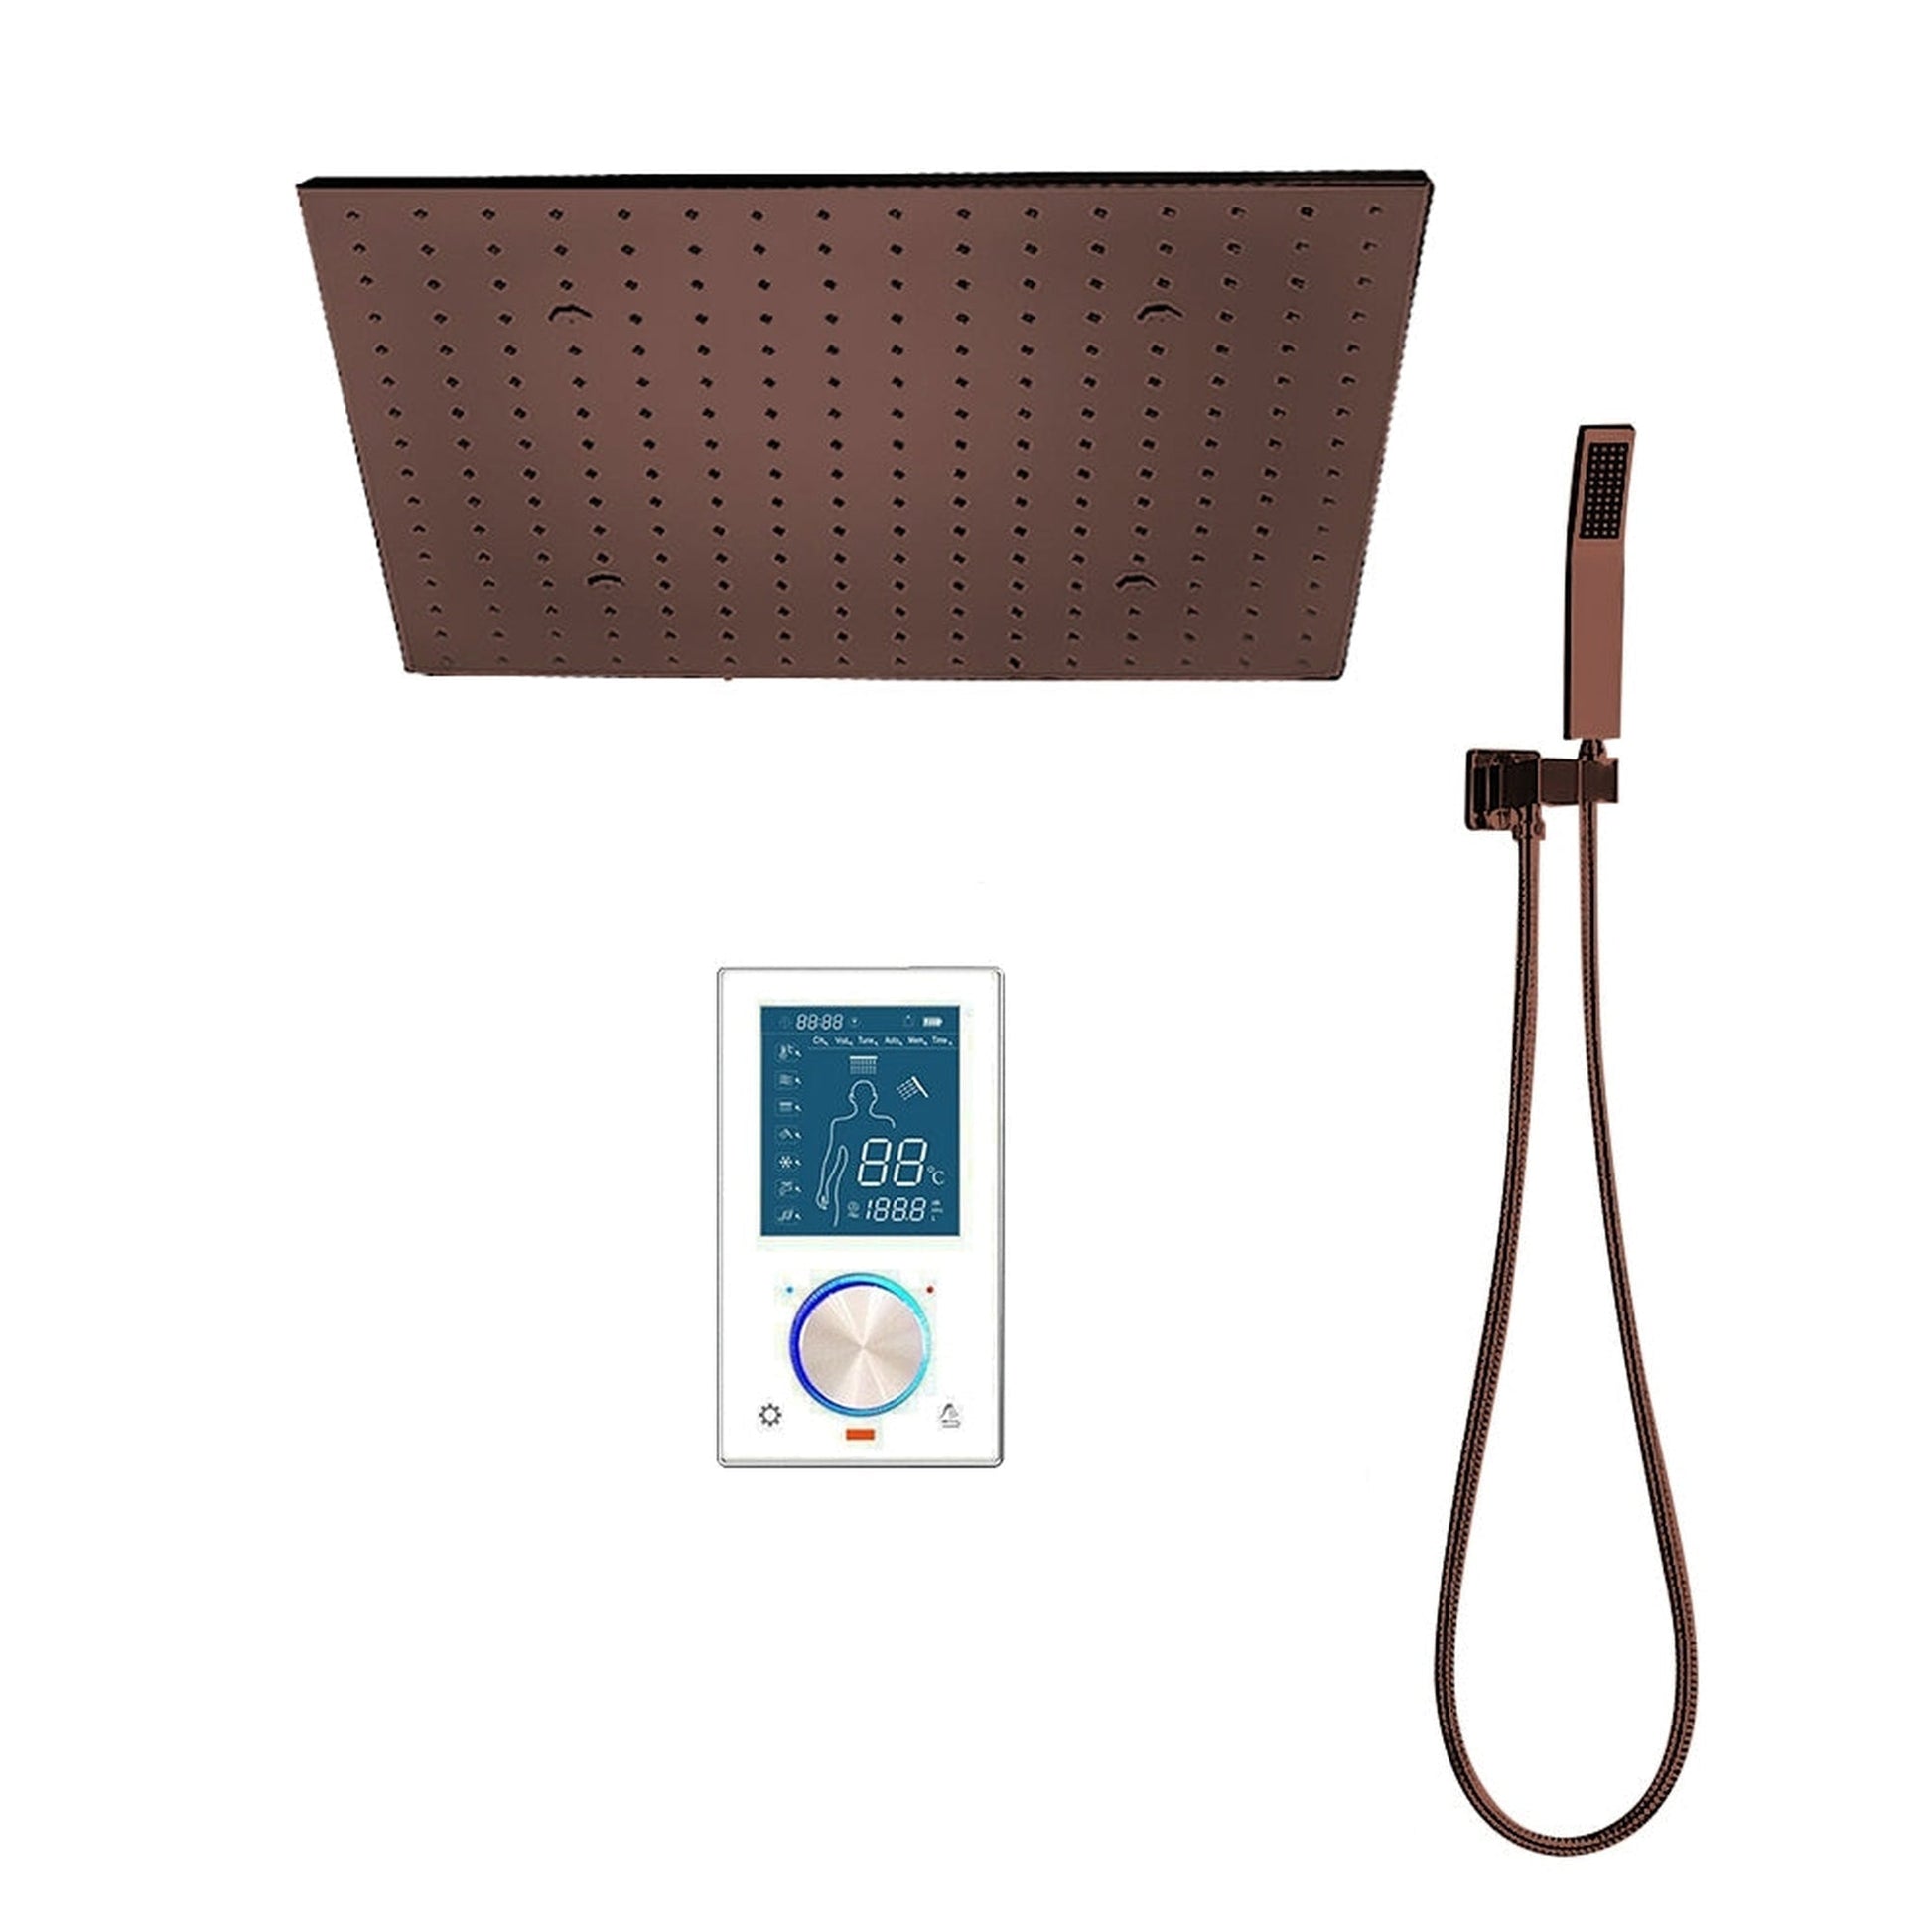 Fontana Creative Luxury Light Oil Rubbed Bronze Rectangular Ceiling Mounted Smart LED Widespread Shower Head Rainfall & Mist Shower System With 3-Way Digital Controller and Hand Shower